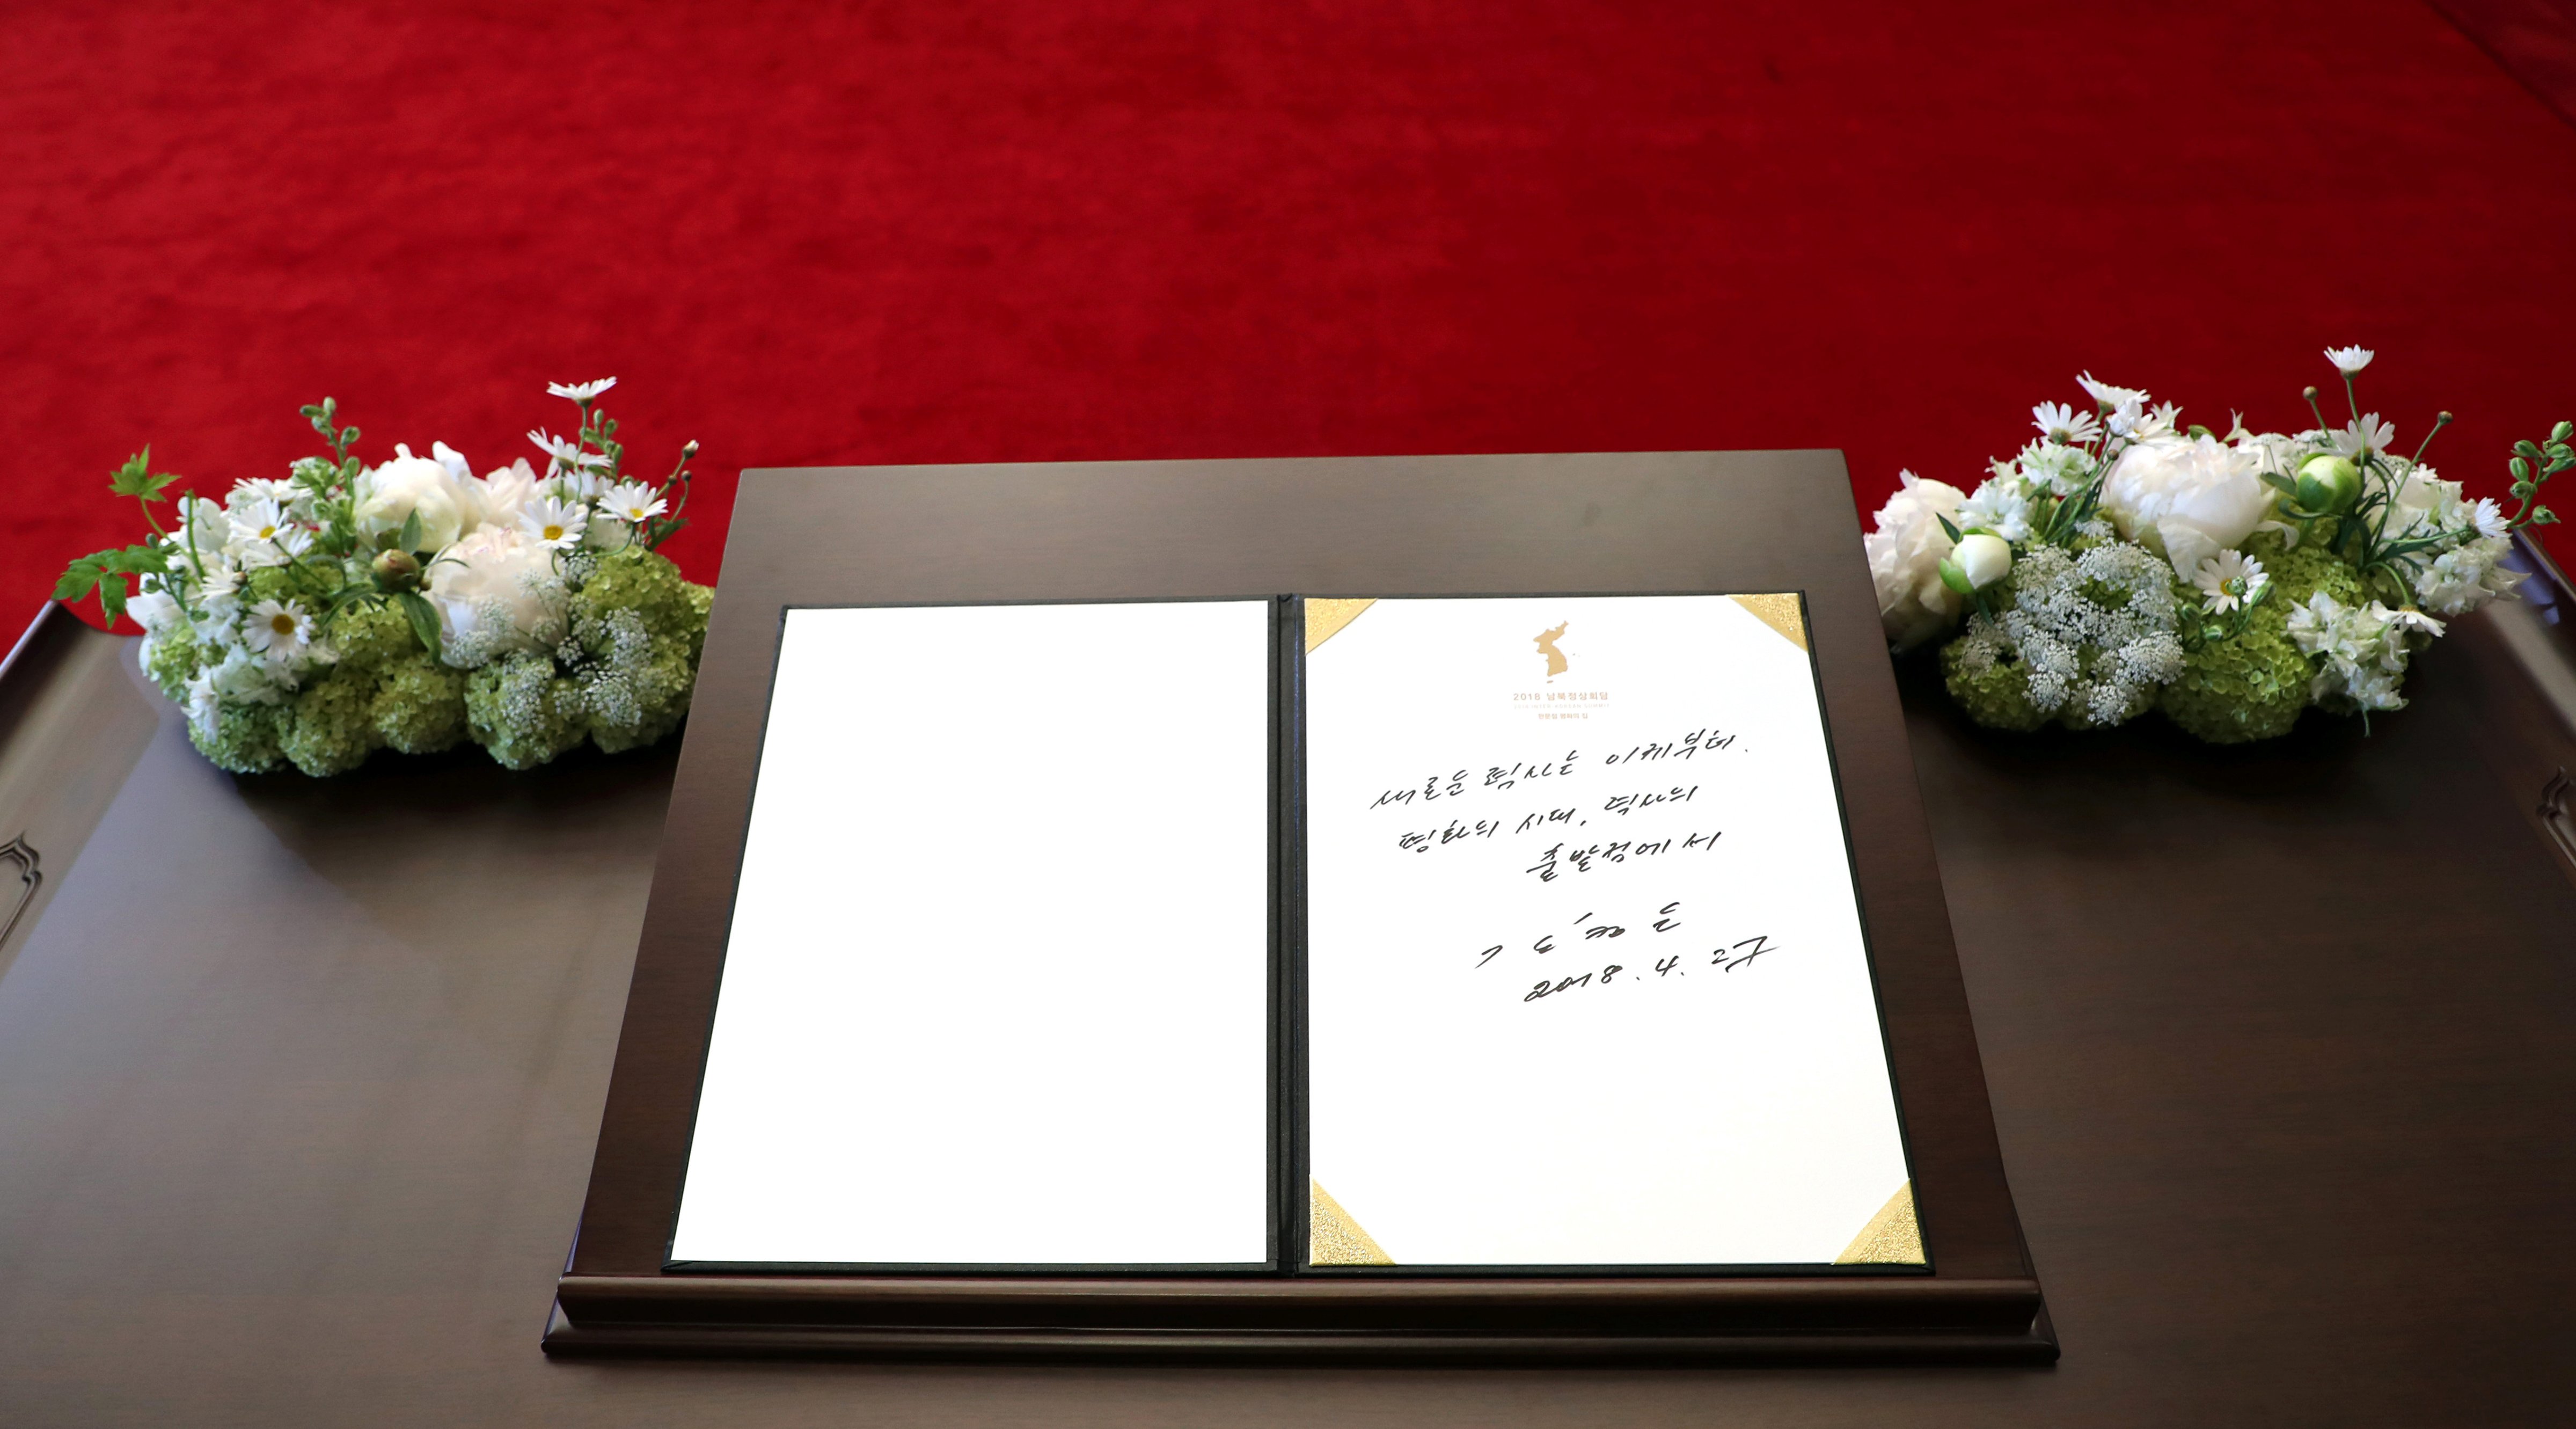 North Korean leader Kim Jong Un's entry in a guestbook at the Peace House in the demilitarized zone separating the two Koreas, South Korea, April 27, 2018. The writing reads "A new history starts now. An age of peace, from the starting point of history." (Handout—Reuters)